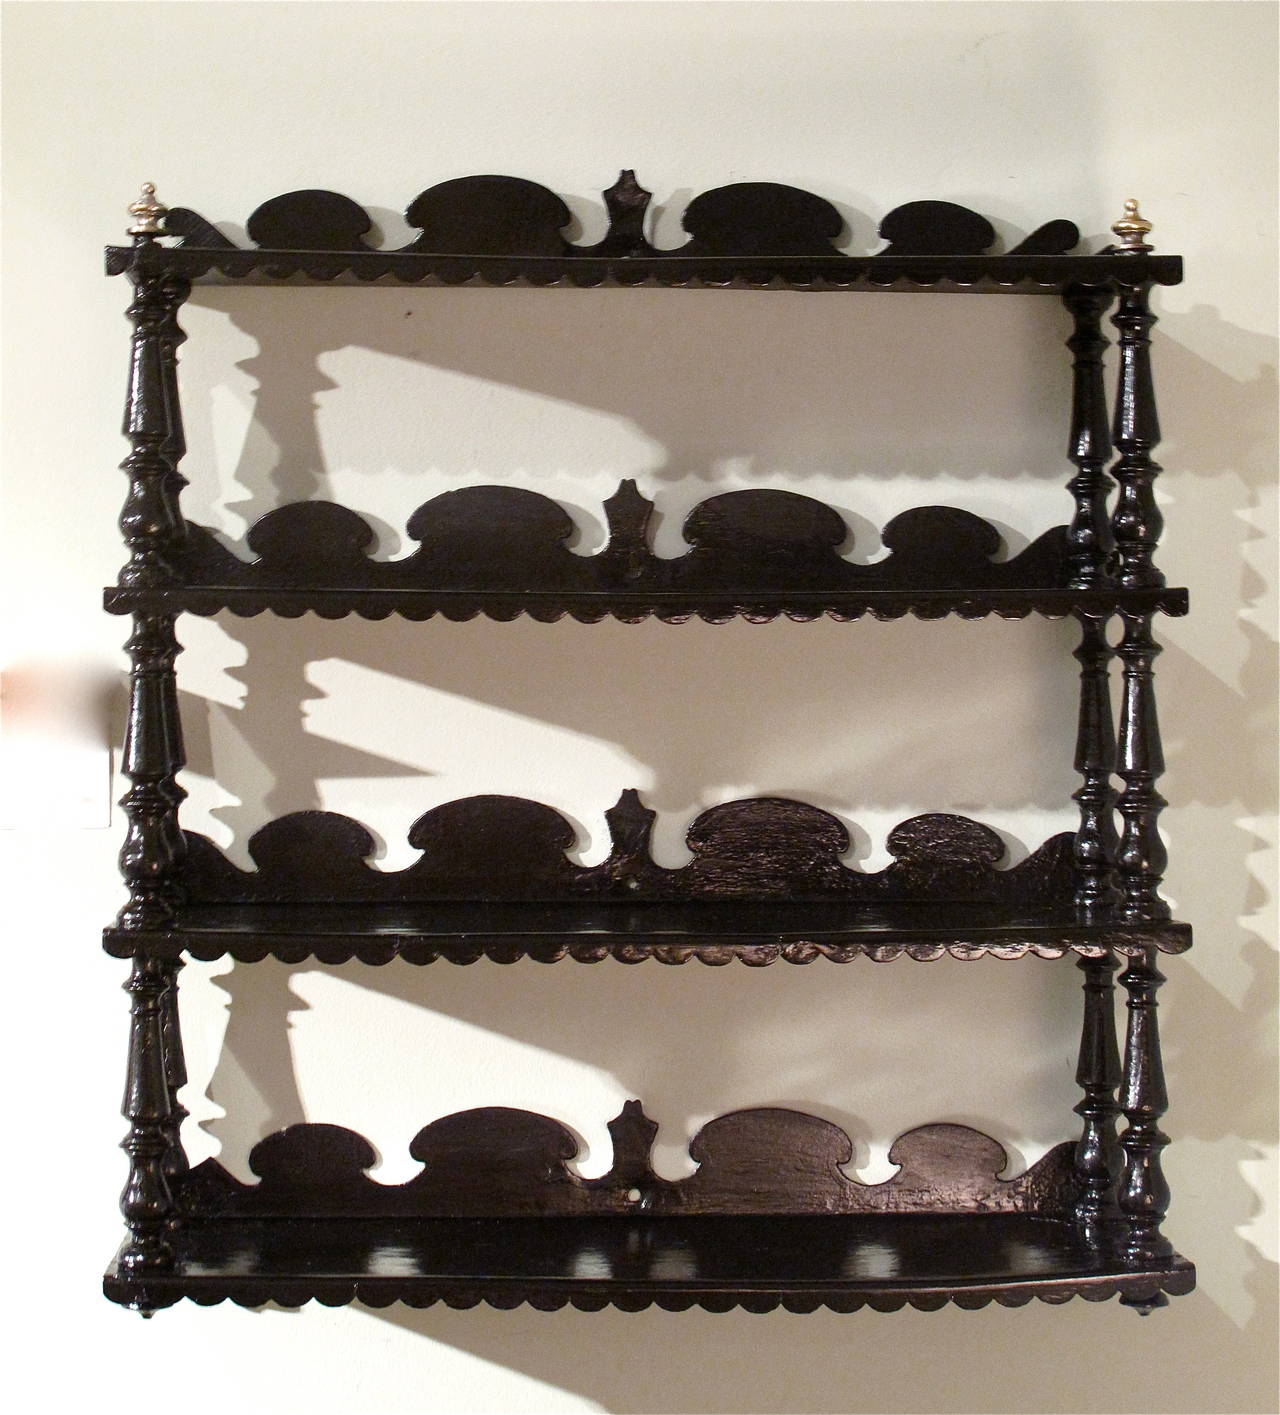 A charming 19th century hanging shelf, probably English, but possibly American, dating ca. 1830-1850, with turned elements supporting the four levels of scalloped and shaped tôle shelves, the top shelf finished with two brass finials.